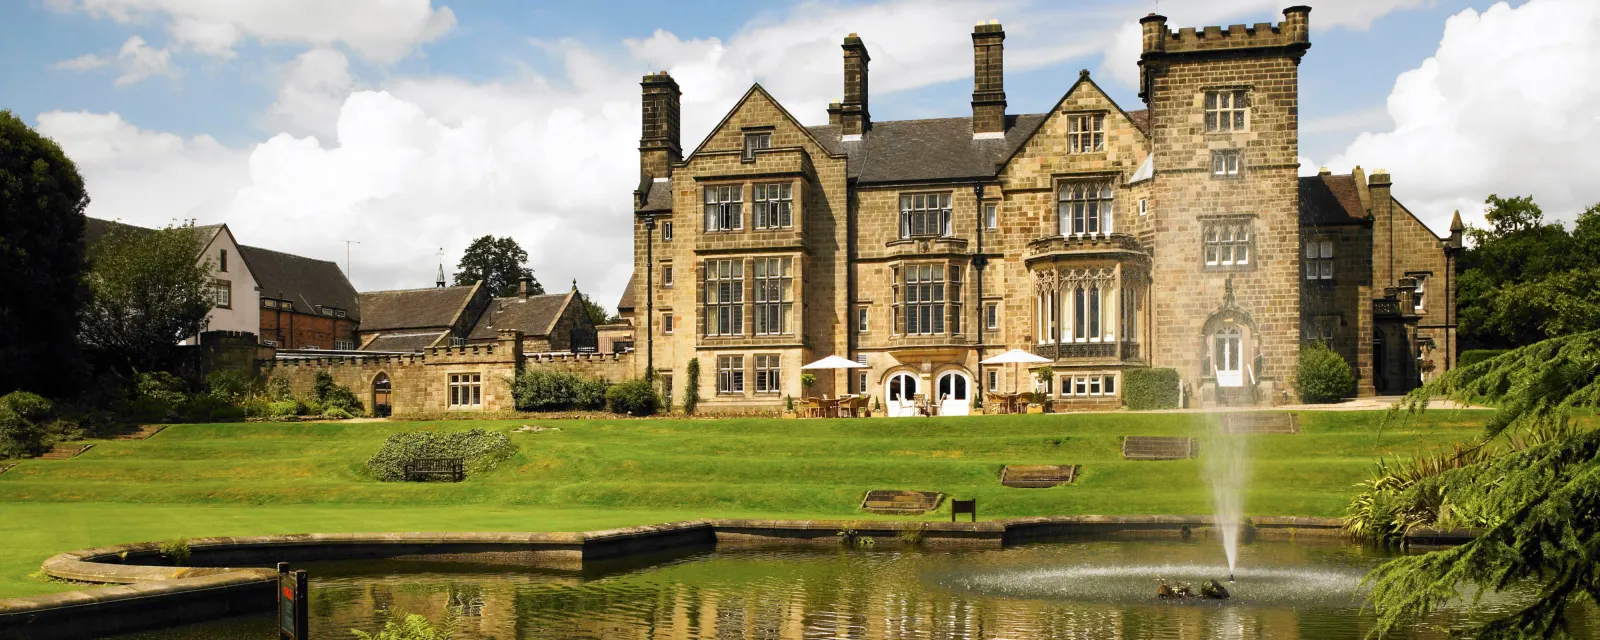 Delta Hotels By Marriott Breadsall Priory Country Club